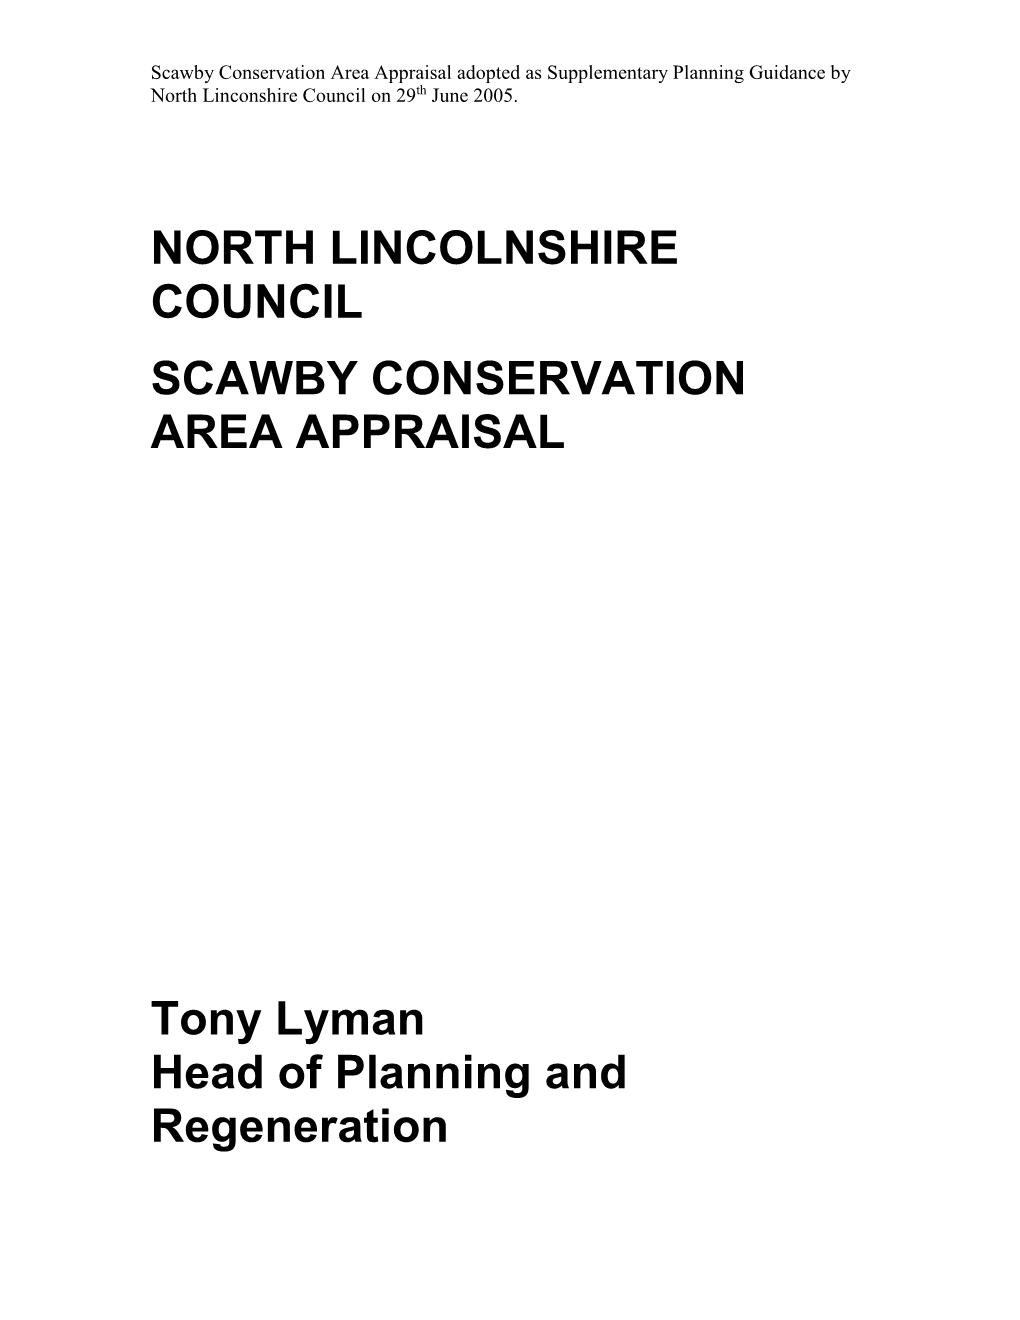 Scawby Conservation Area Appraisal Adopted As Supplementary Planning Guidance by North Linconshire Council on 29Th June 2005